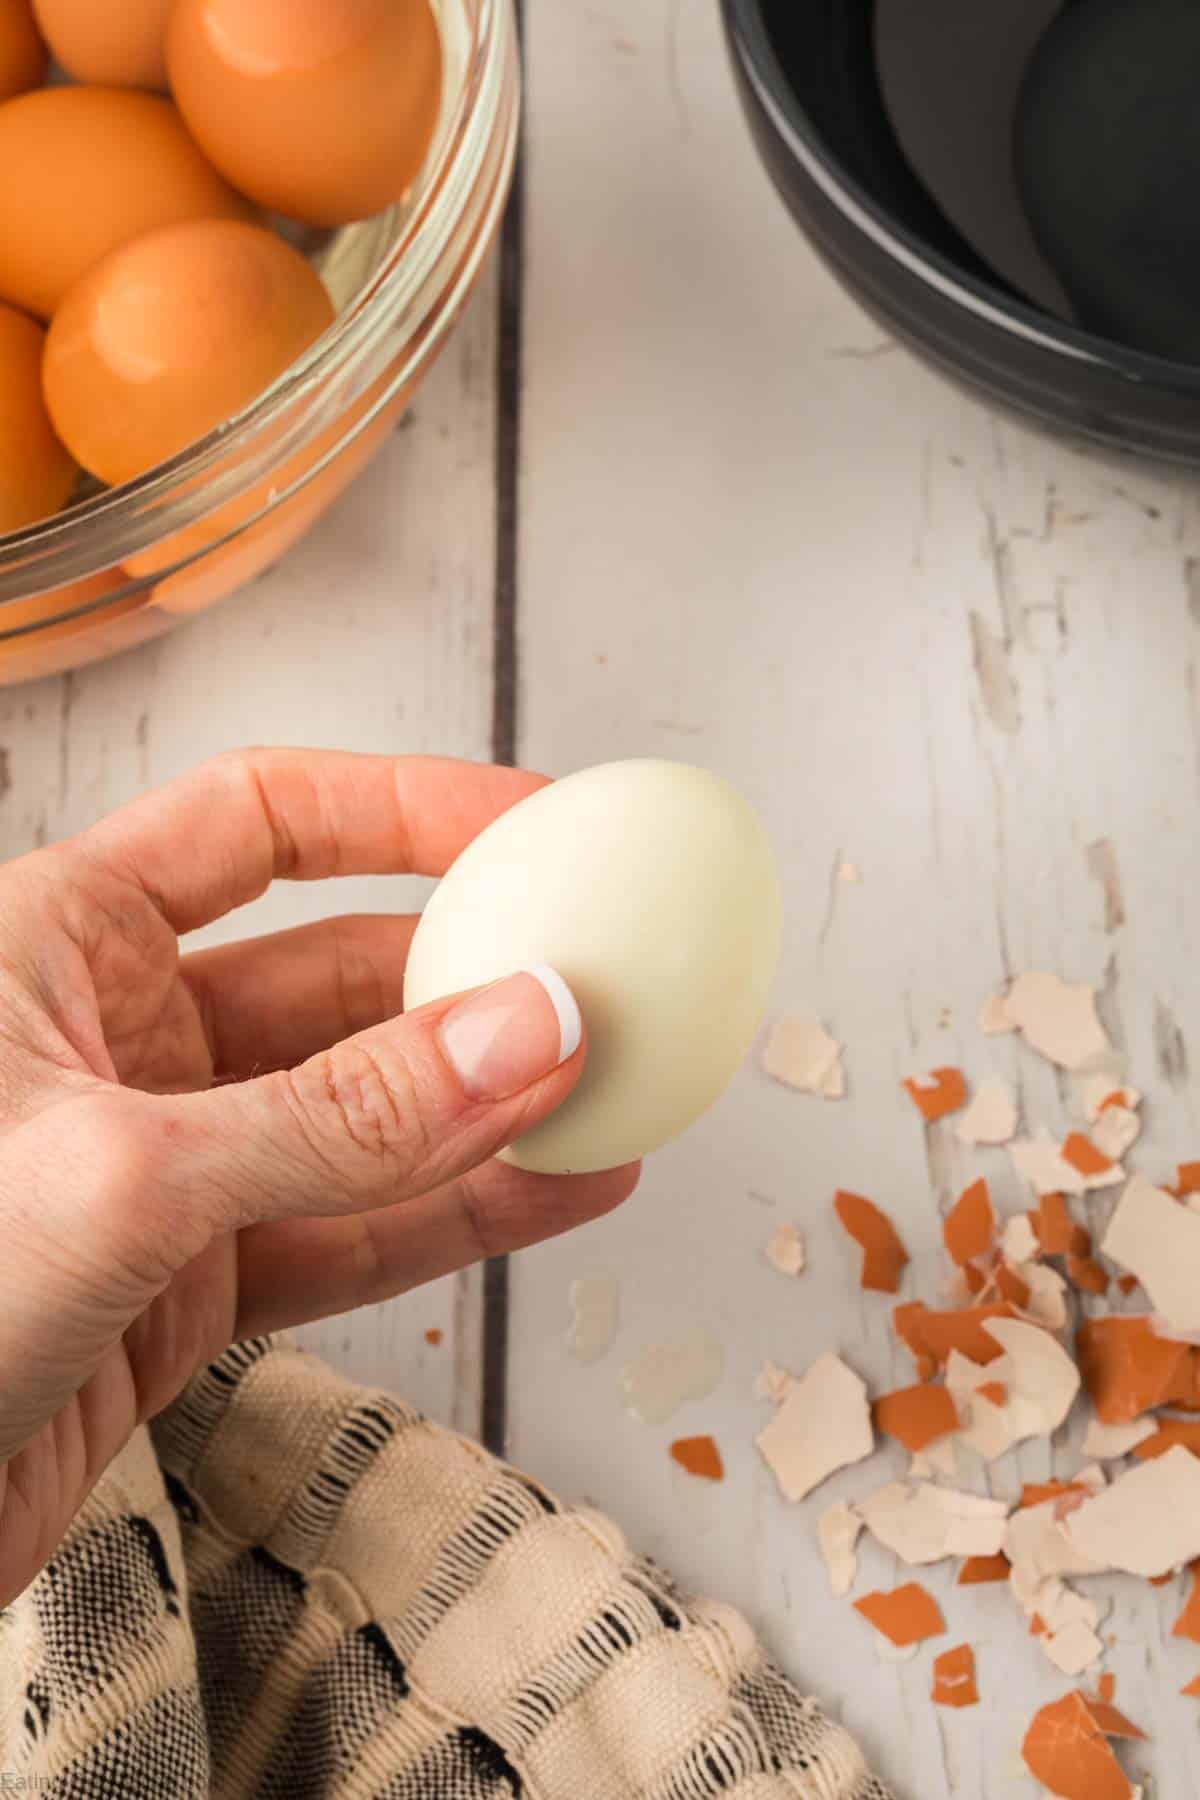 How to Make Hard Boiled Eggs in the Oven (& VIDEO!) - Baked Eggs